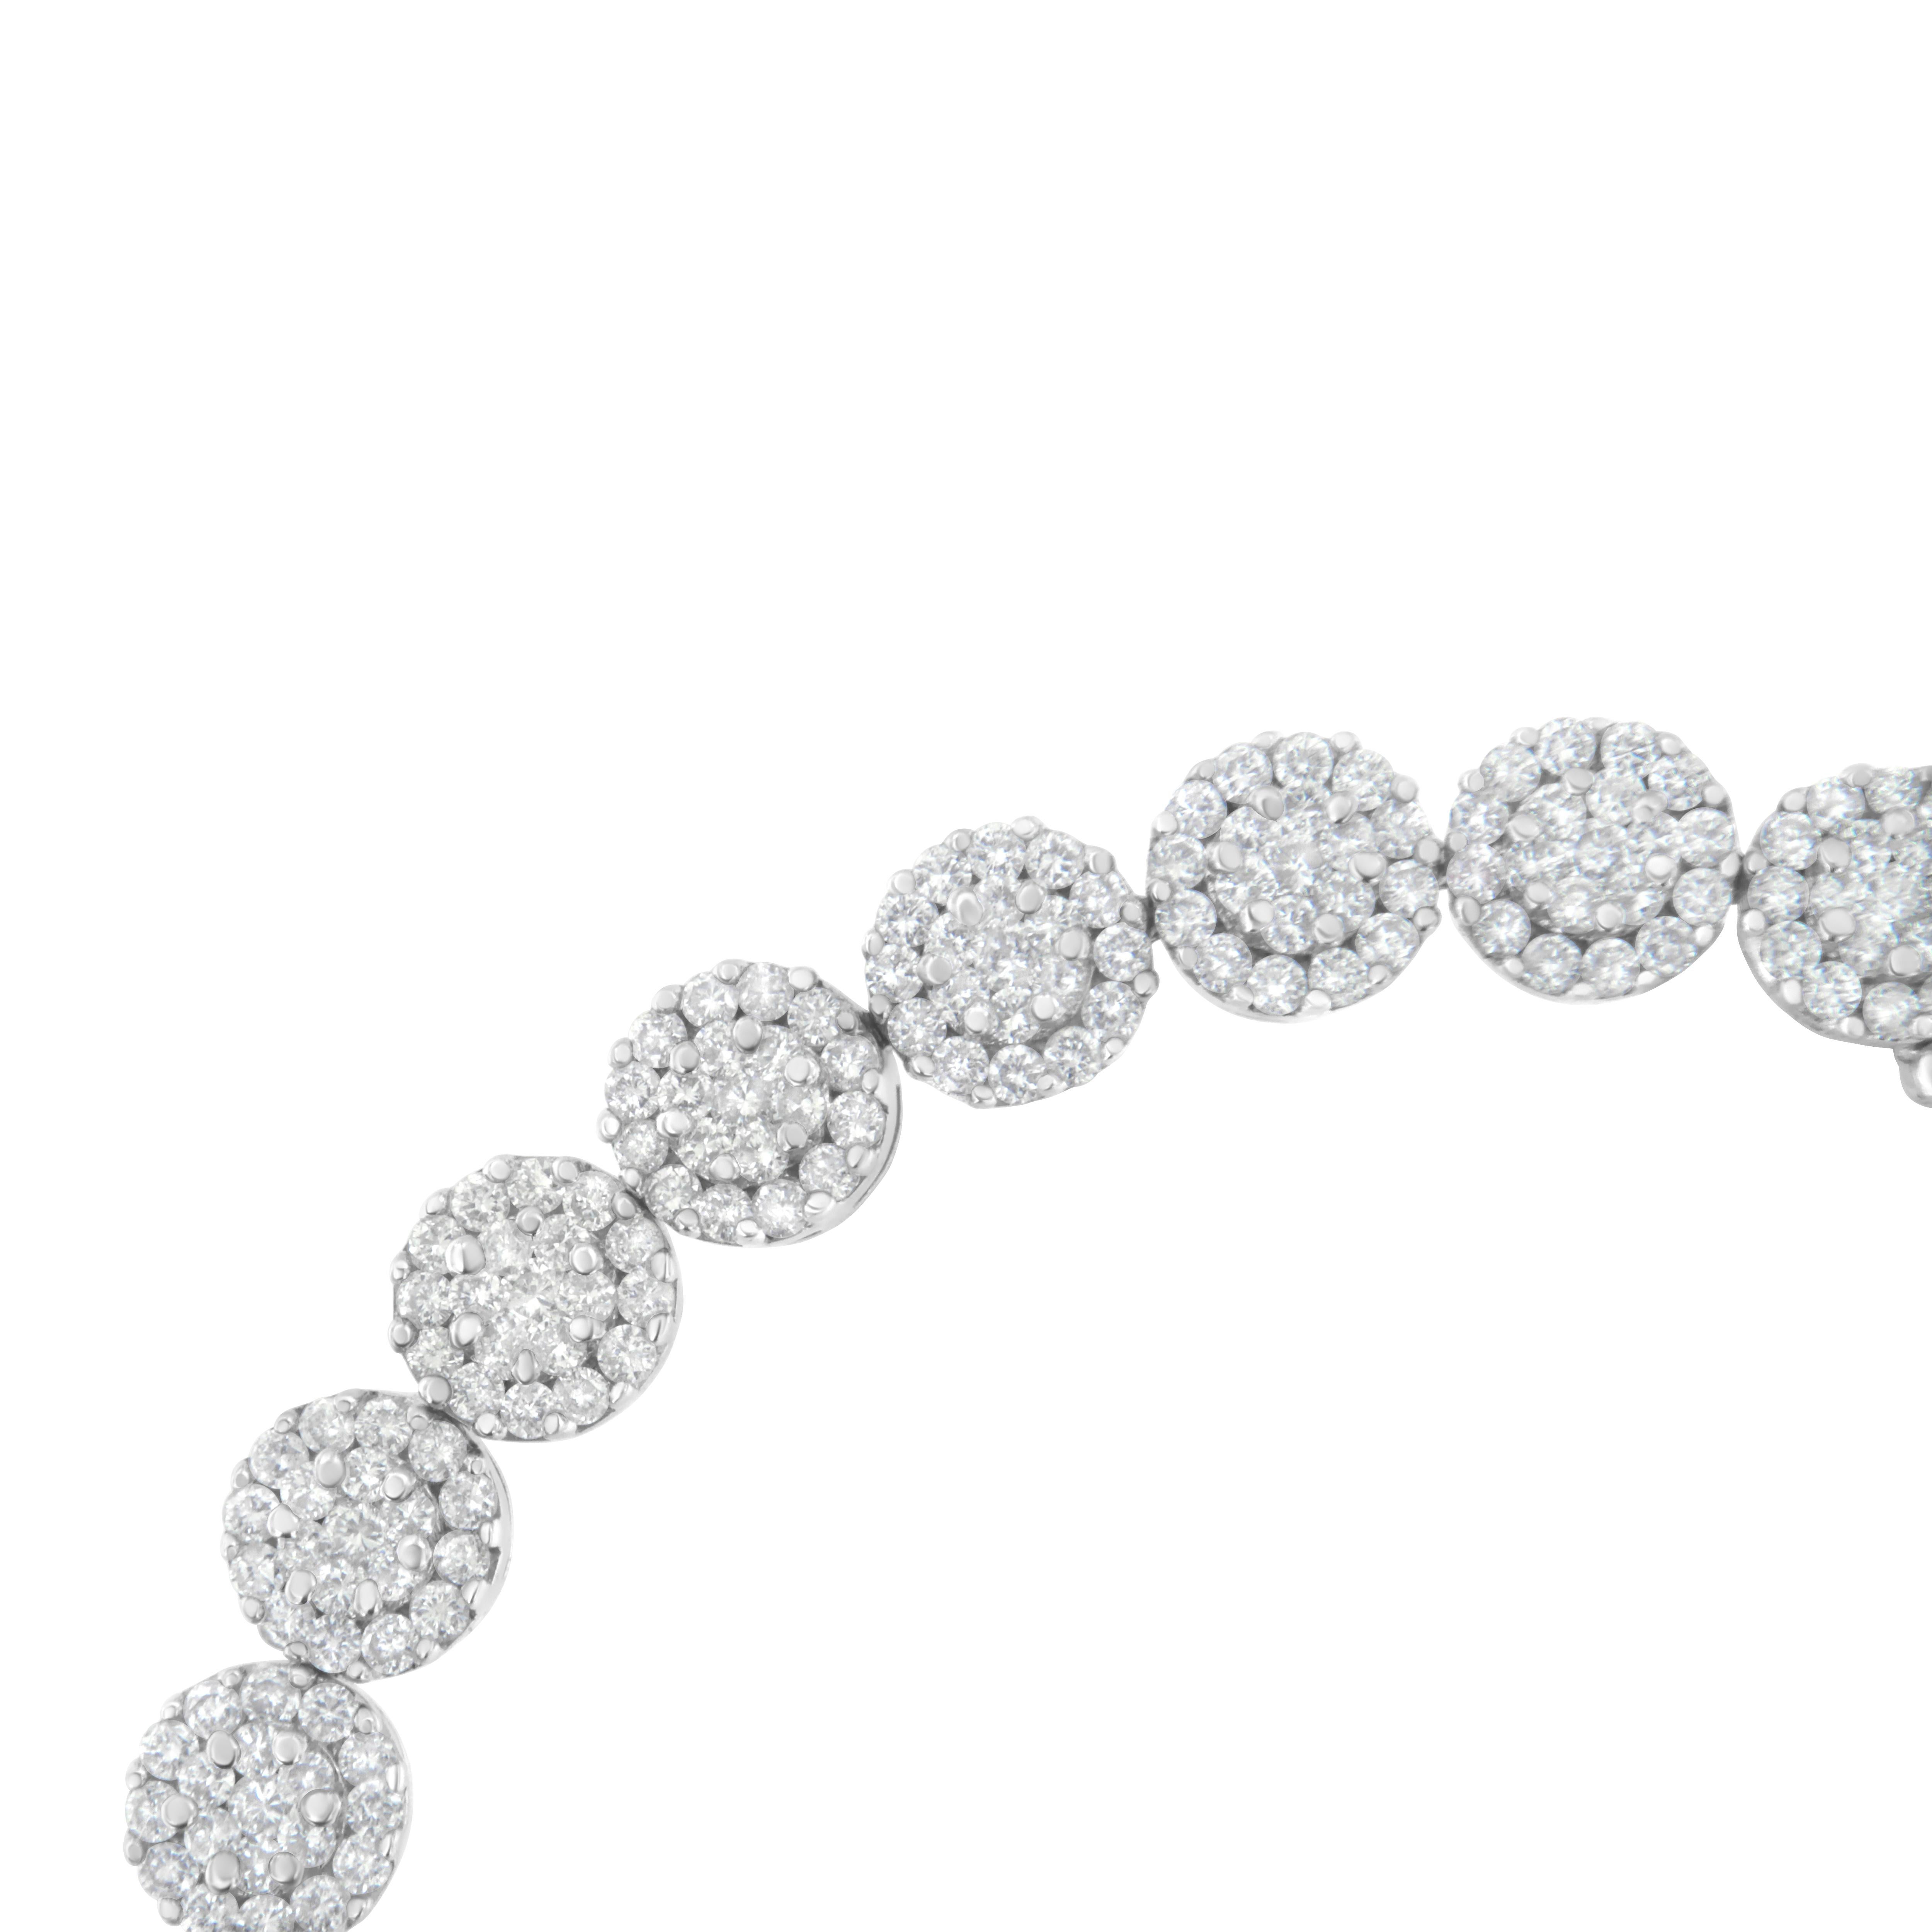 This stunning 14k white gold bracelet features 3 7/8 carats of beautiful, natural diamonds. Embellished in a prong setting sits round-cut diamonds in gold floral-like links. This is the perfect accessory for any occasion, formal or casual. Bracelet